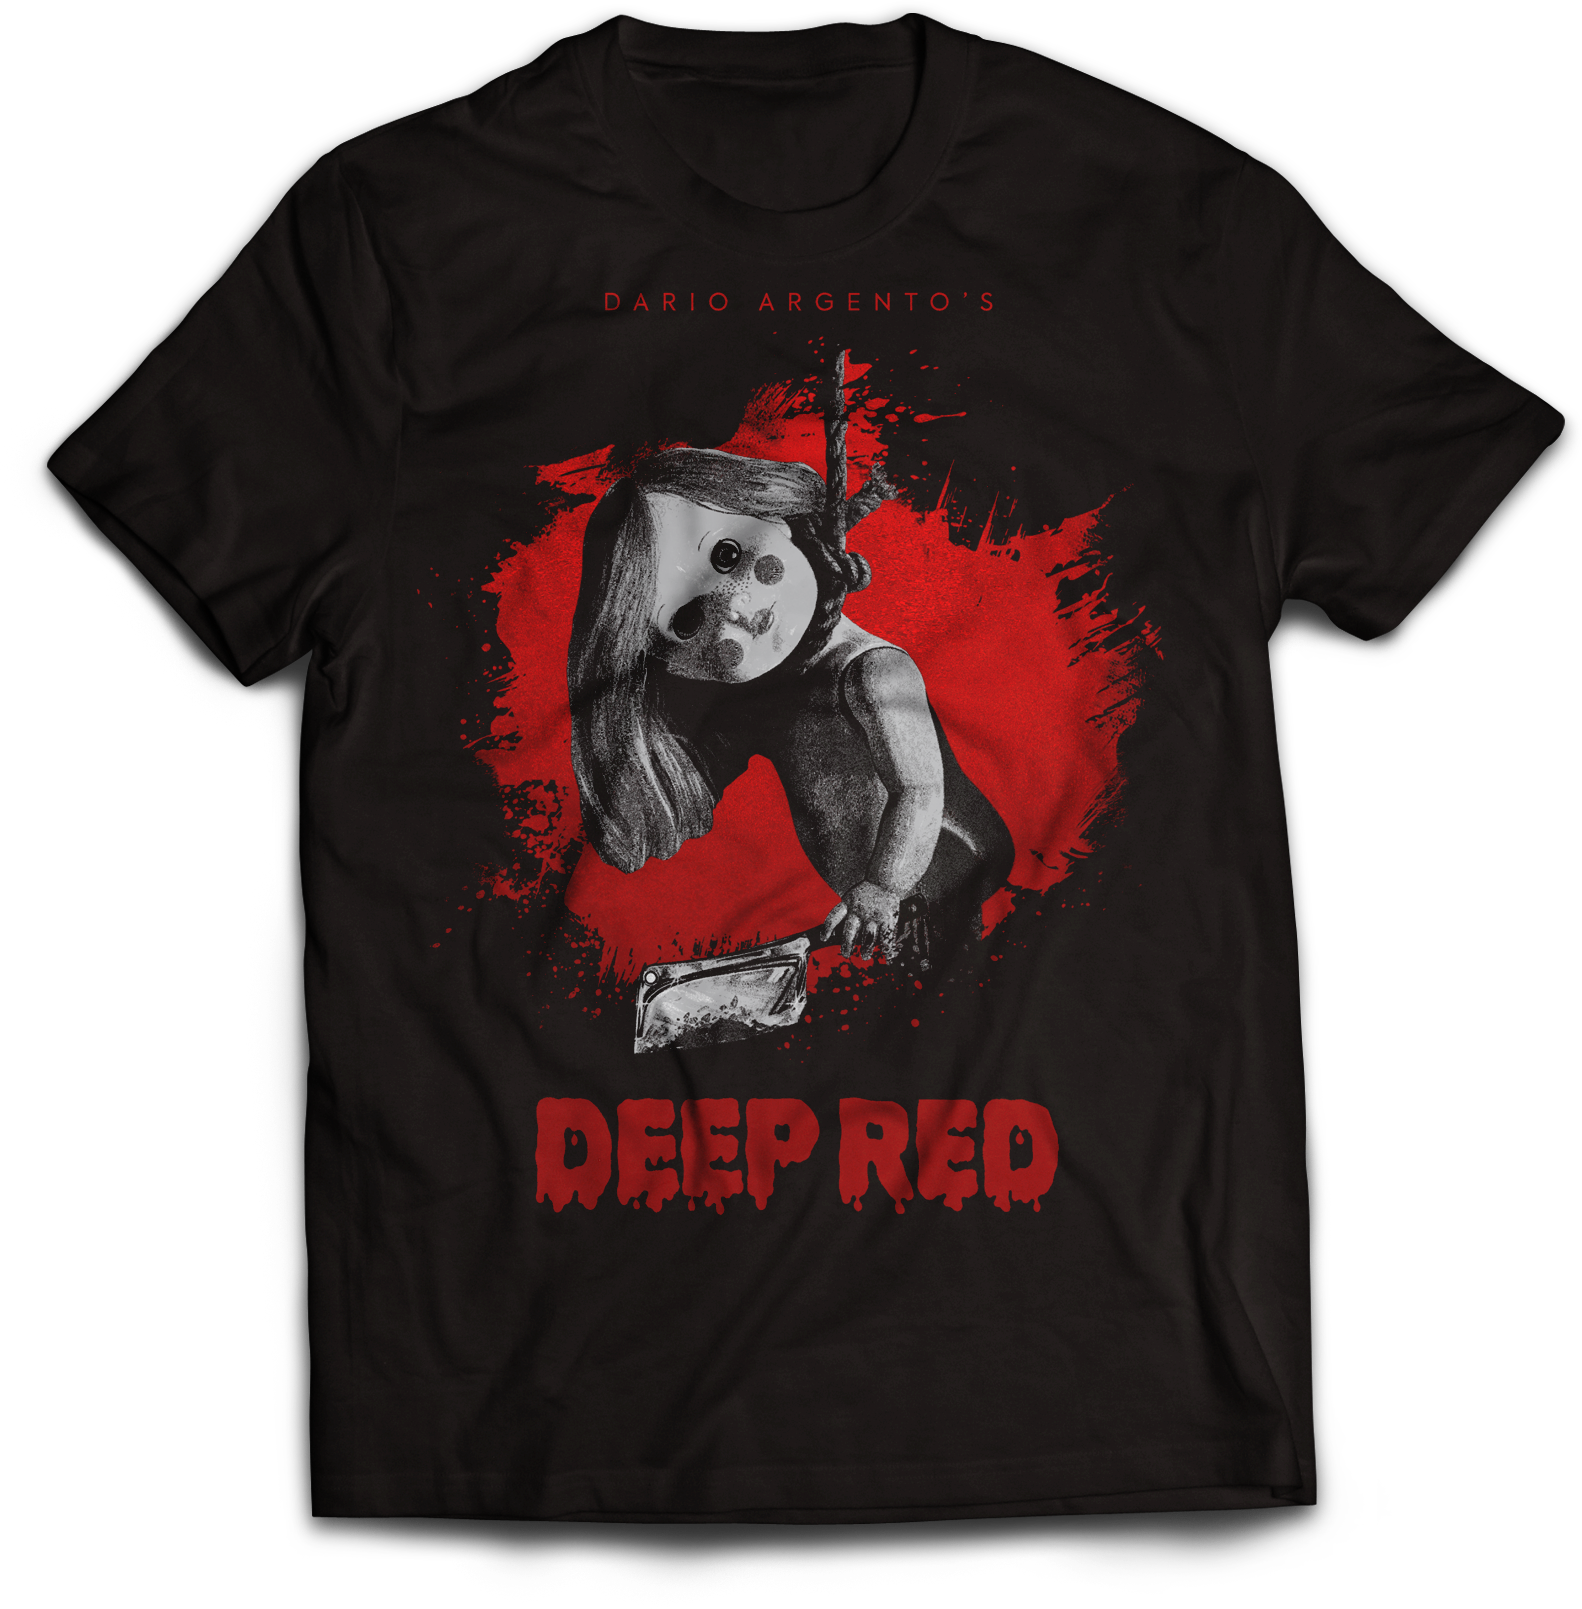 DARIO ARGENTO “DEEP RED” LIMITED EDITION ARROW VIDEO 4K COVER T-SHIRT